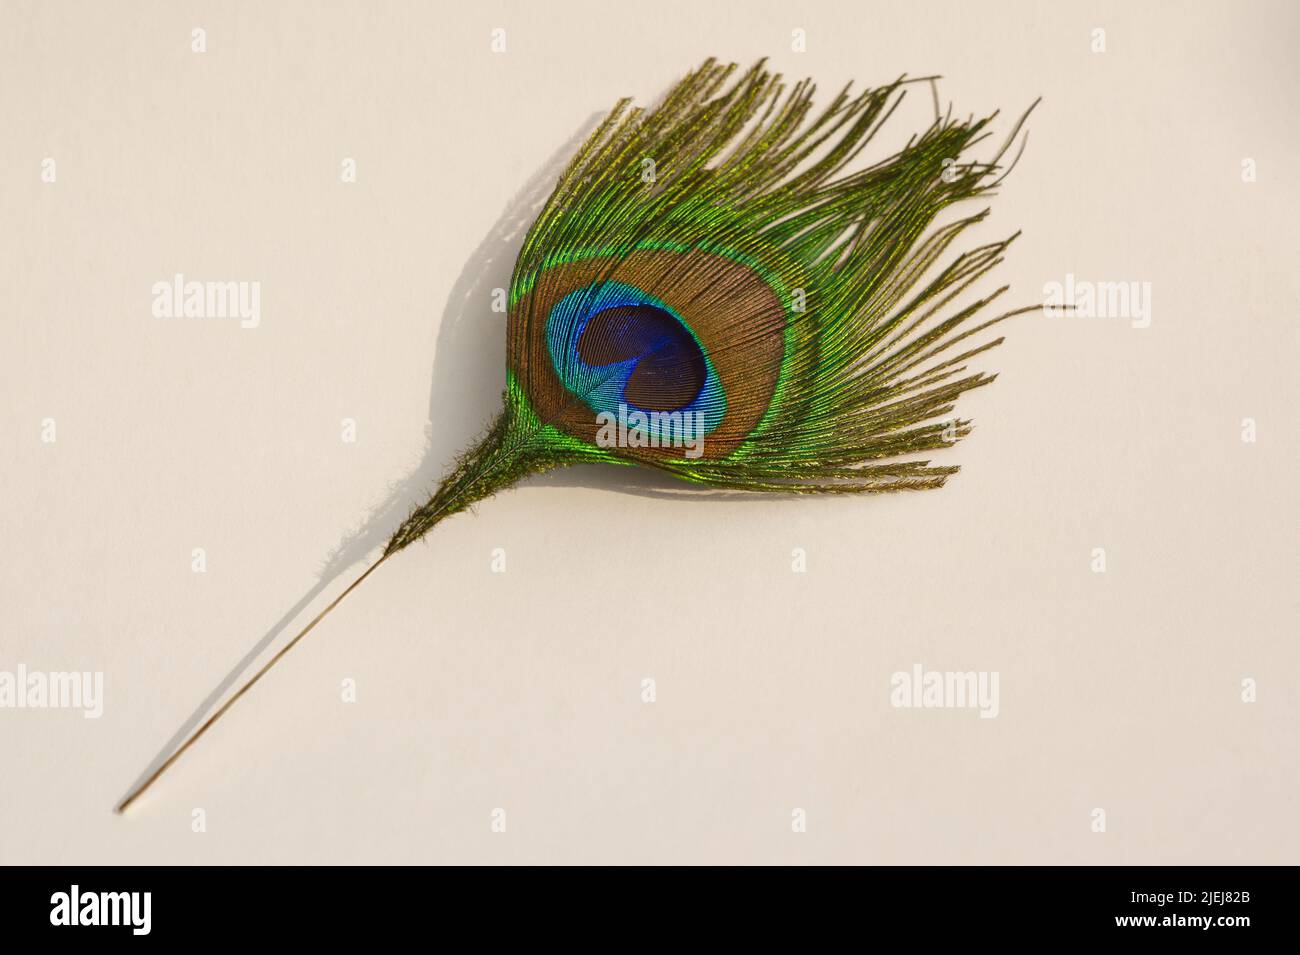 Close up detail of peacock feather on white background. Pavo, Phasianidae. Stock Photo